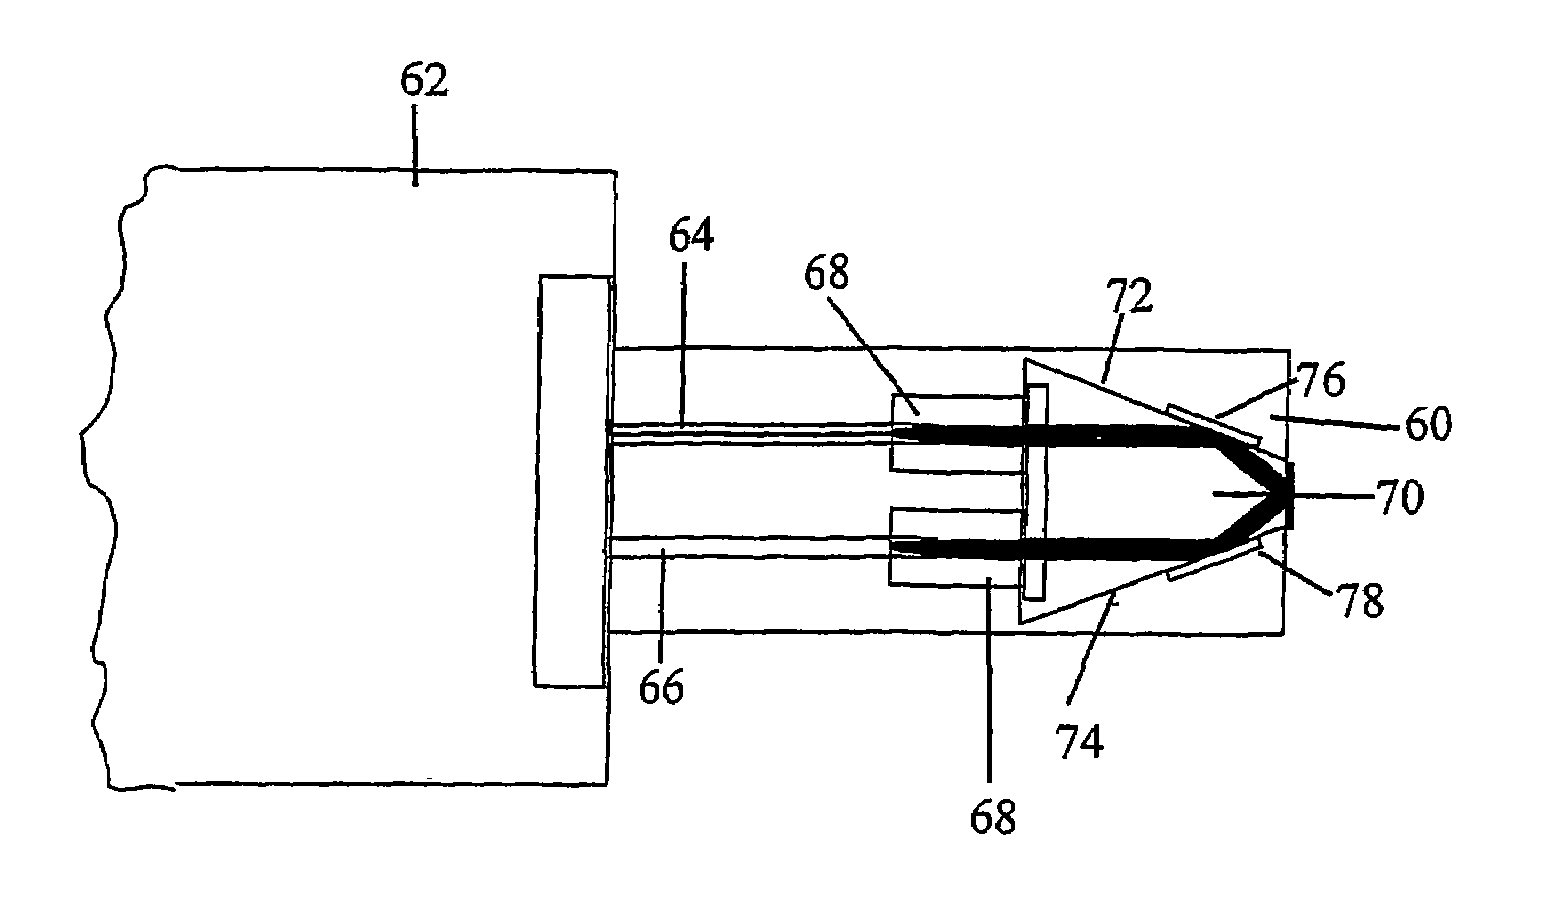 Optical connector with total internal reflection abutting surface